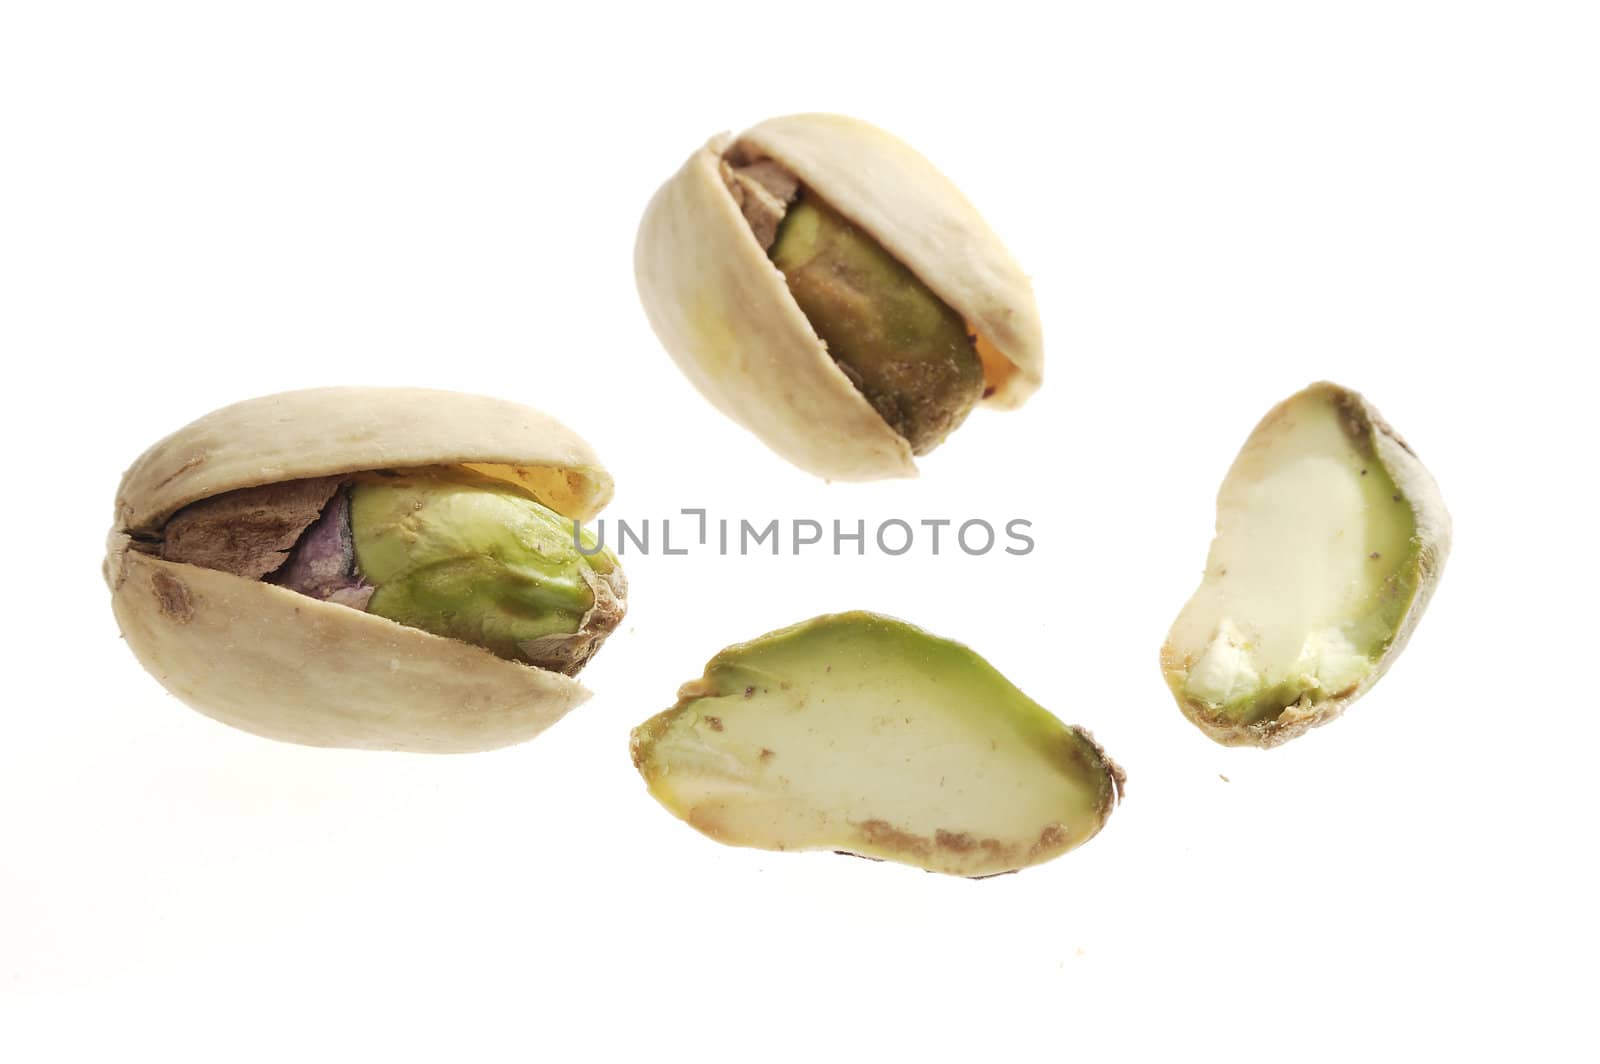 The pistachio nuts by hanusst